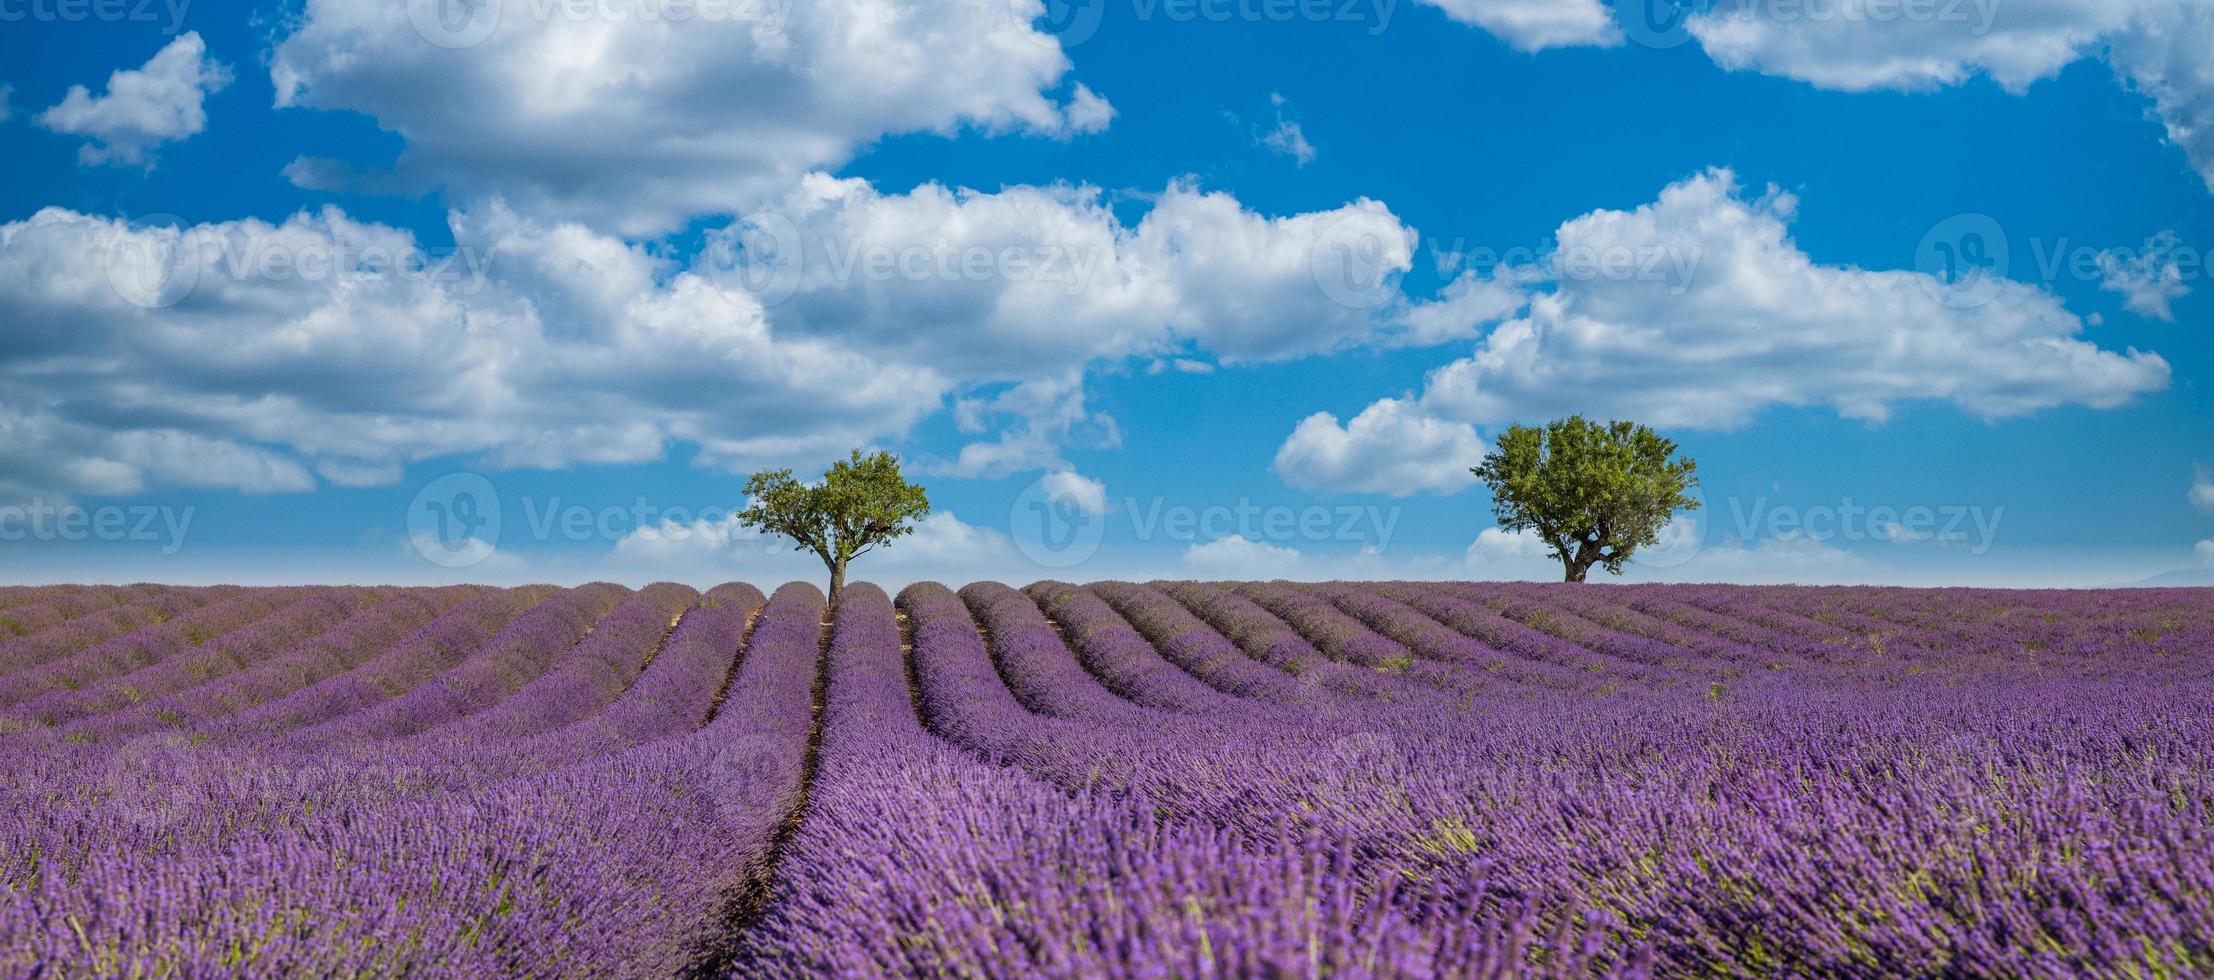 Stunning landscape with lavender field at sunny day. Blooming violet fragrant lavender flowers, amazing countryside scenic, trees and cloudy blue sky. Idyllic nature landscape photo